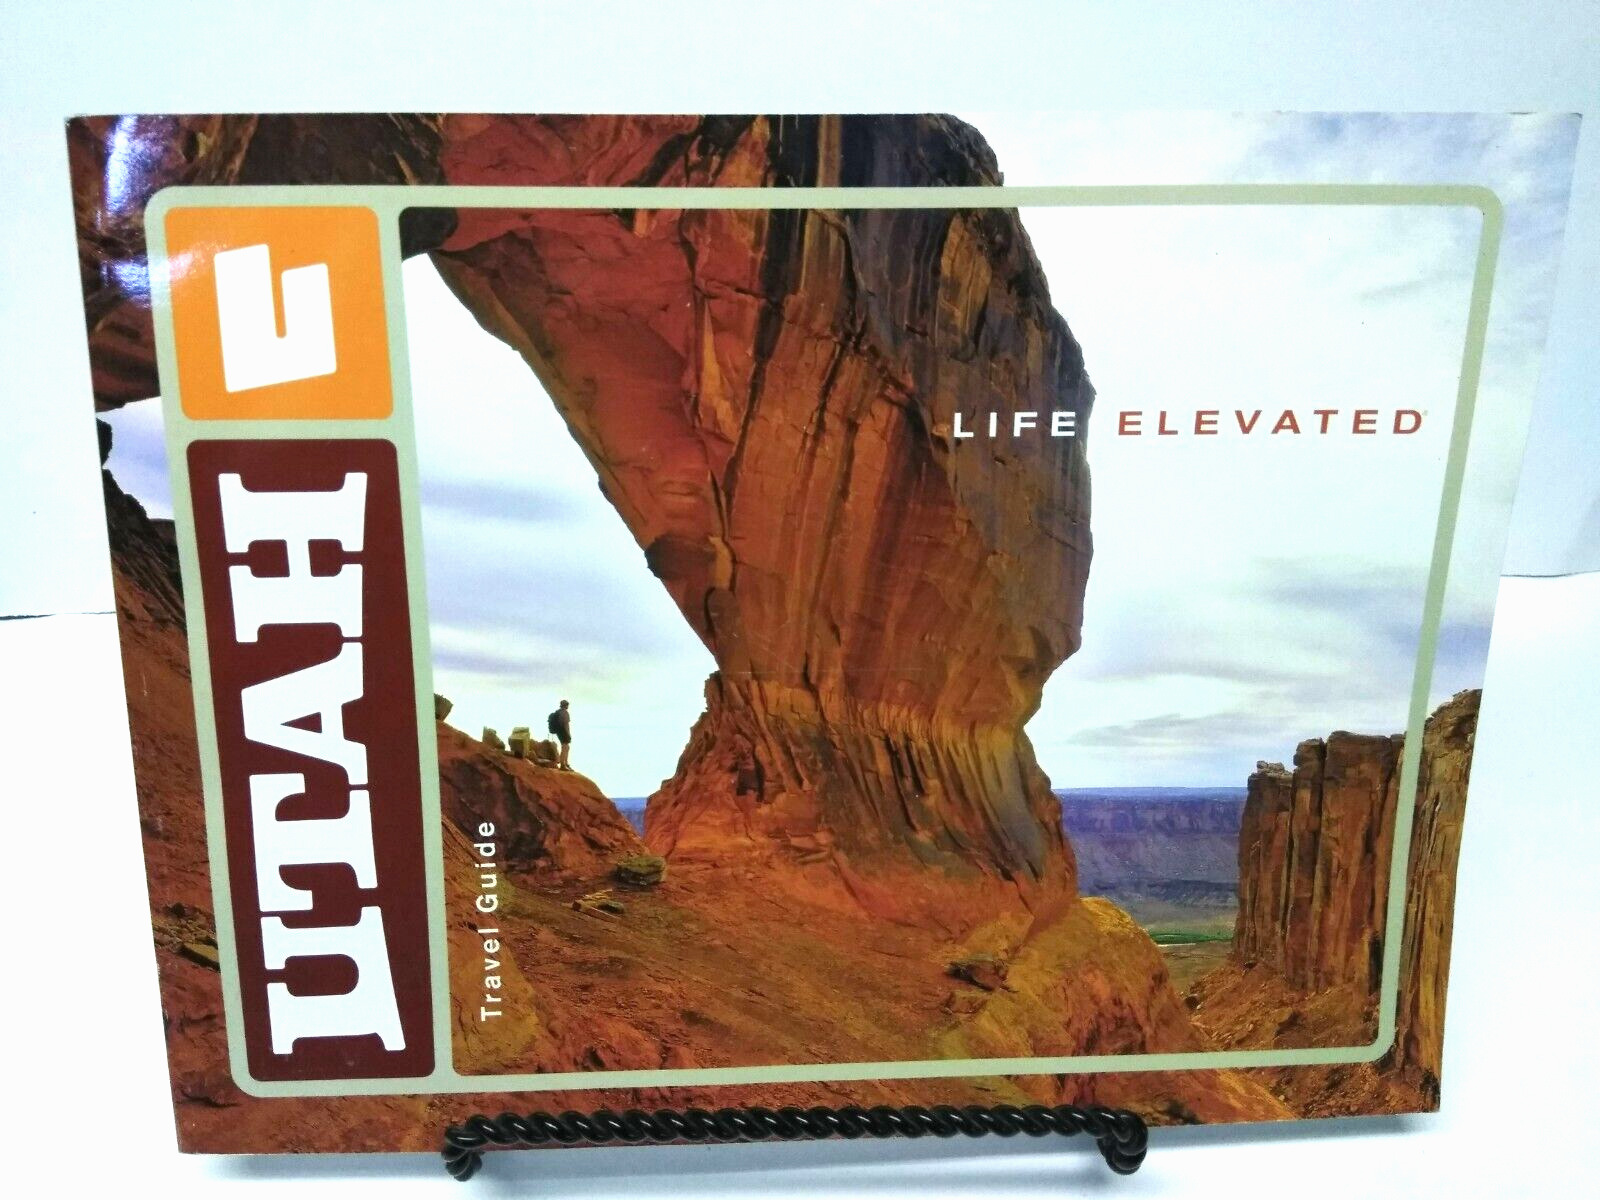 RARE 2010 UTAH TRAVEL AND TOURISM GUIDE - LIFE ELEVATED WITH BEAUTIFUL PICTURES